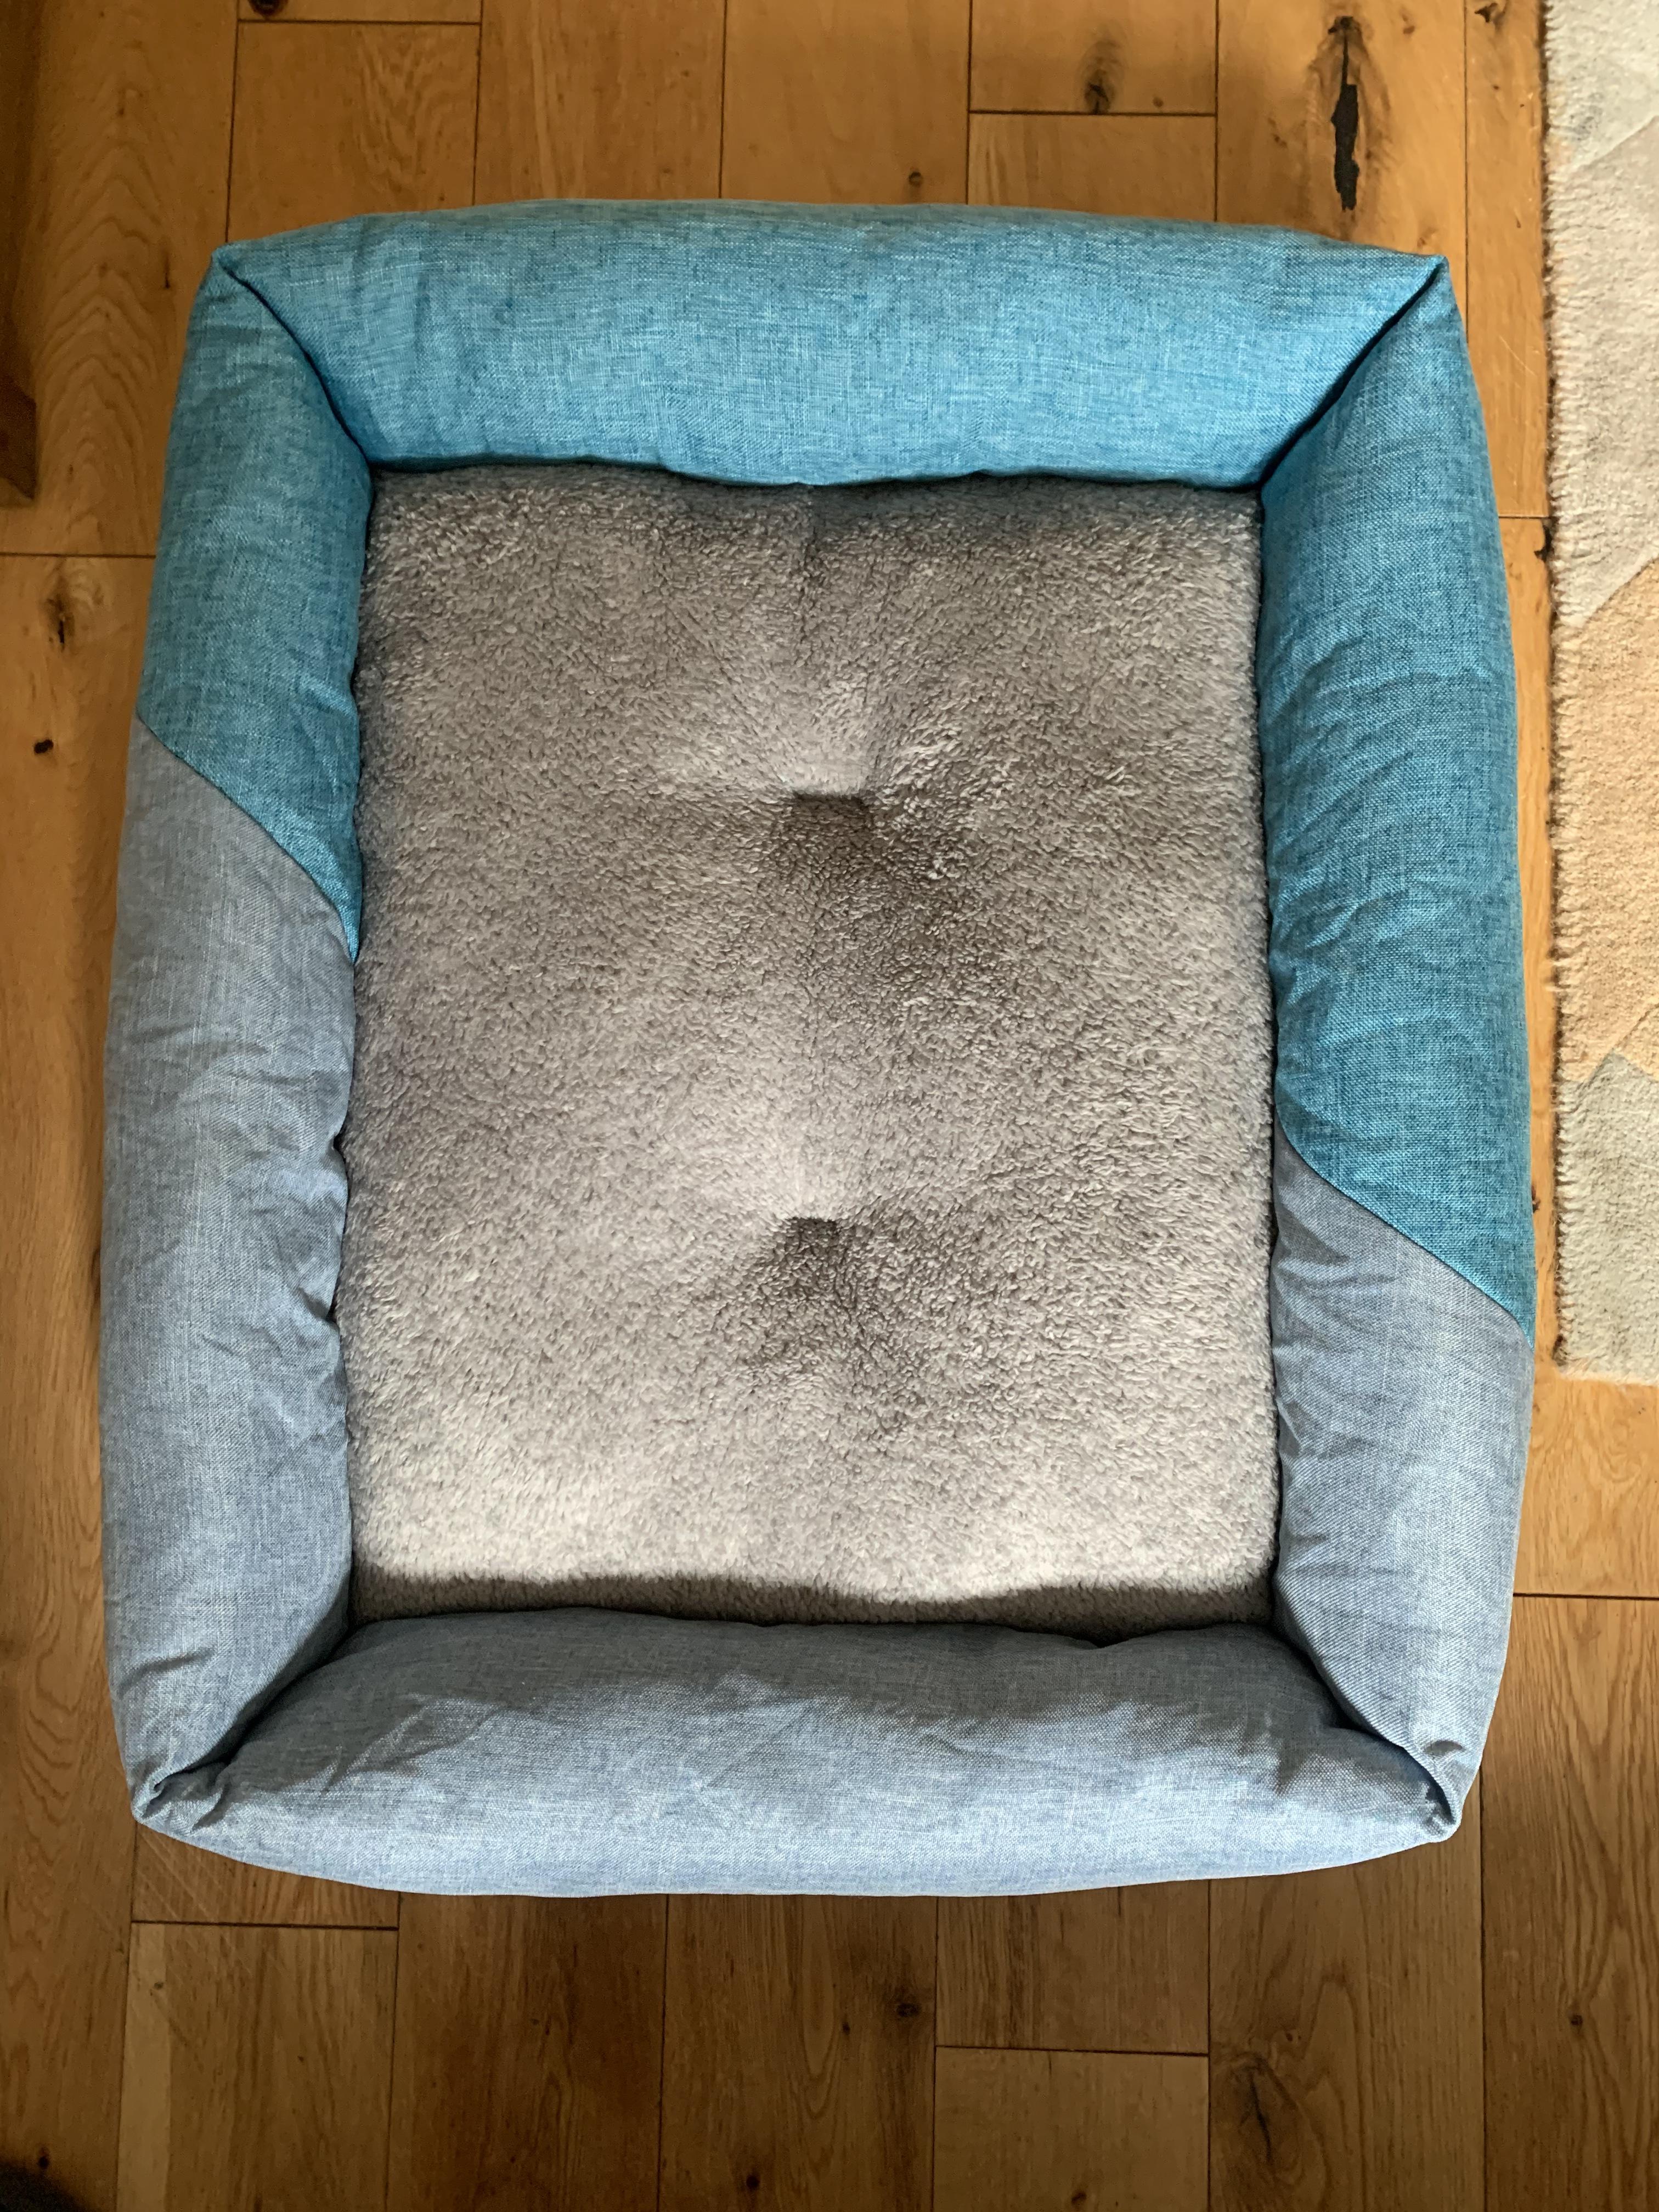 Birds-eye view of anti-anxiety dog bed